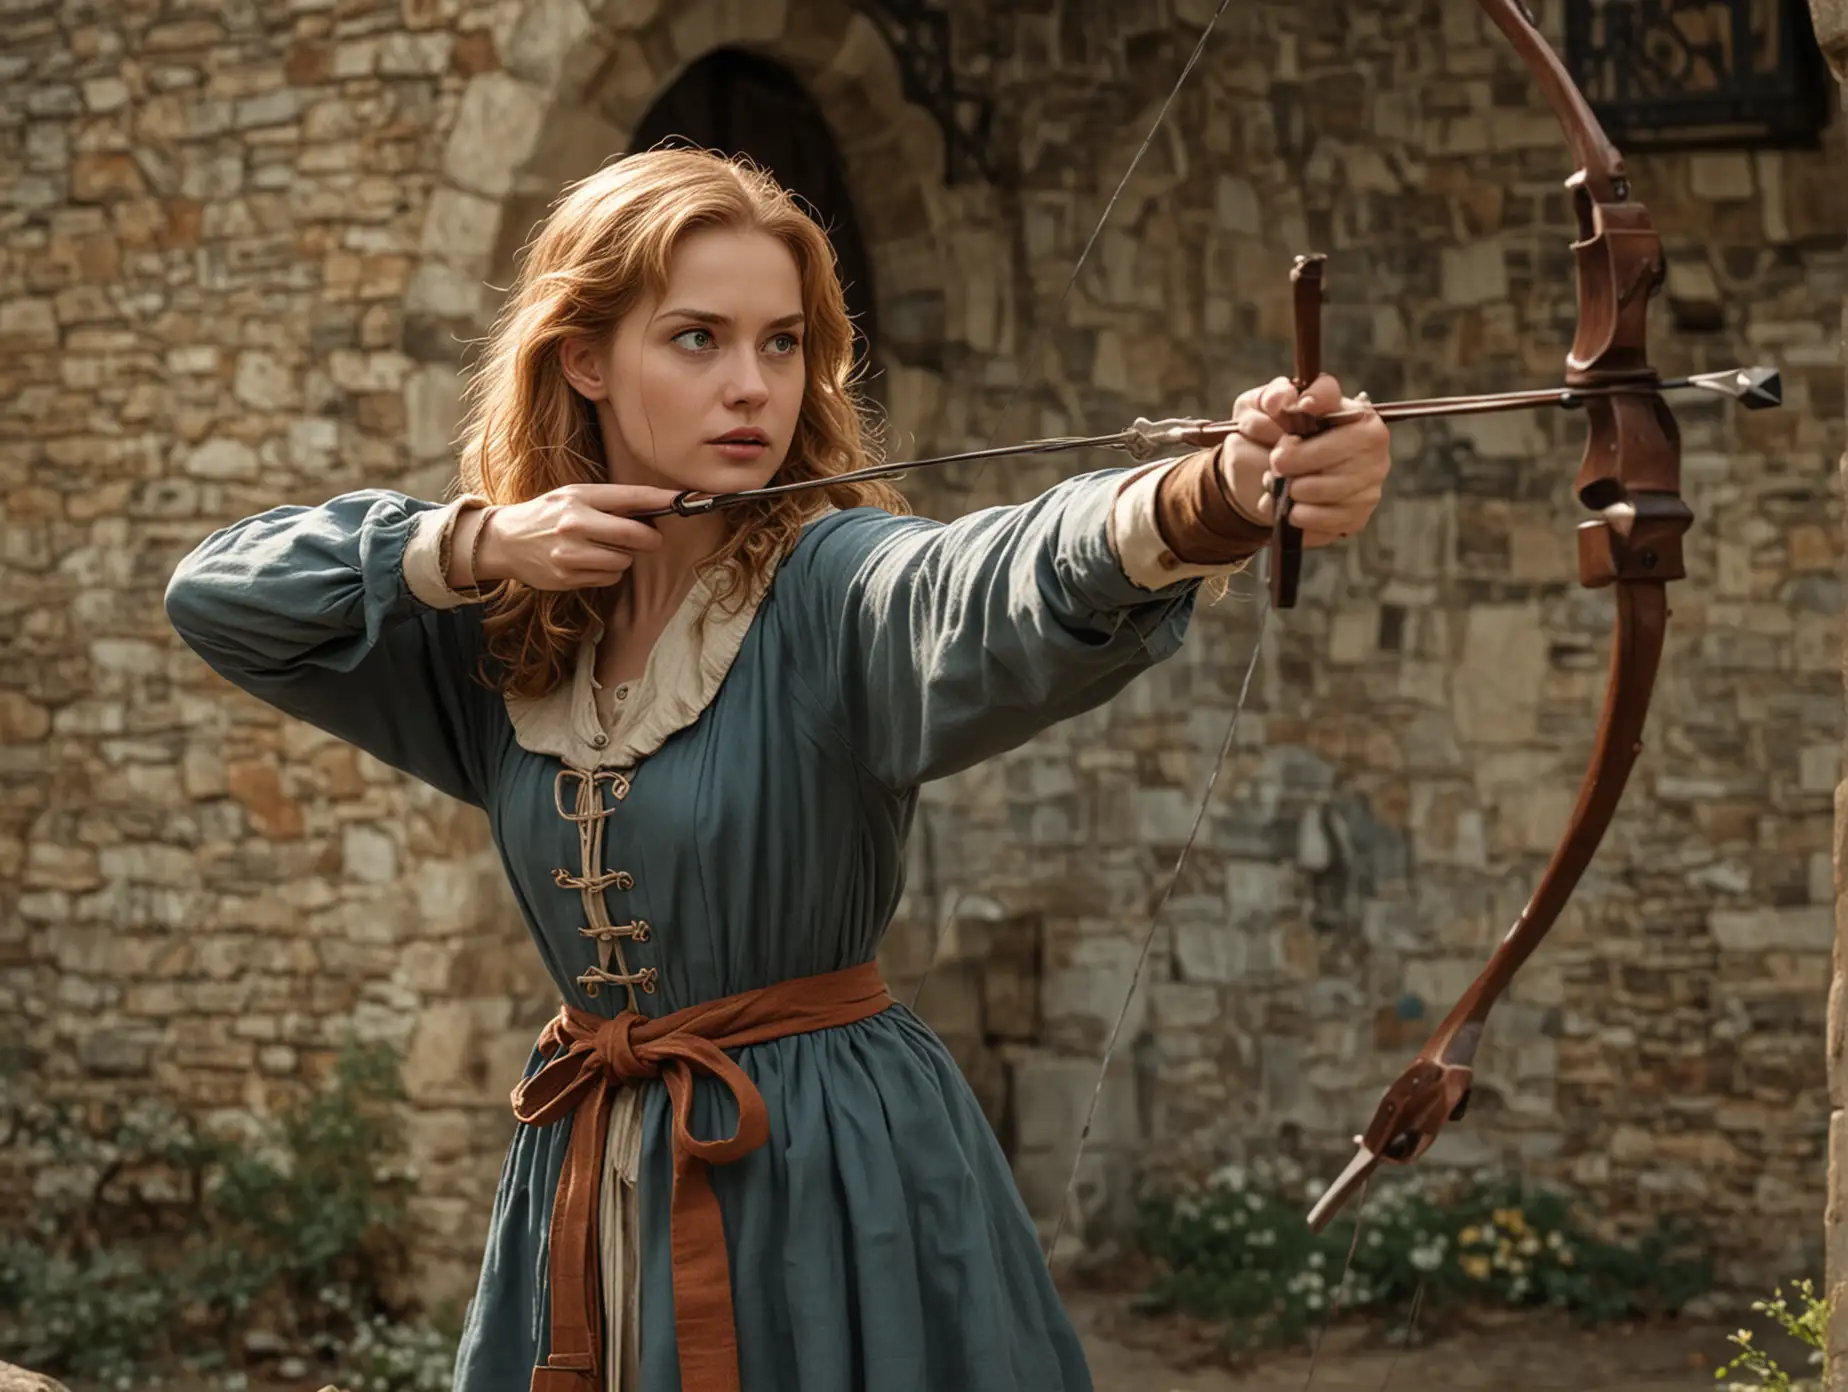 An adult Nancy Drew in the Middle Ages aiming a bow